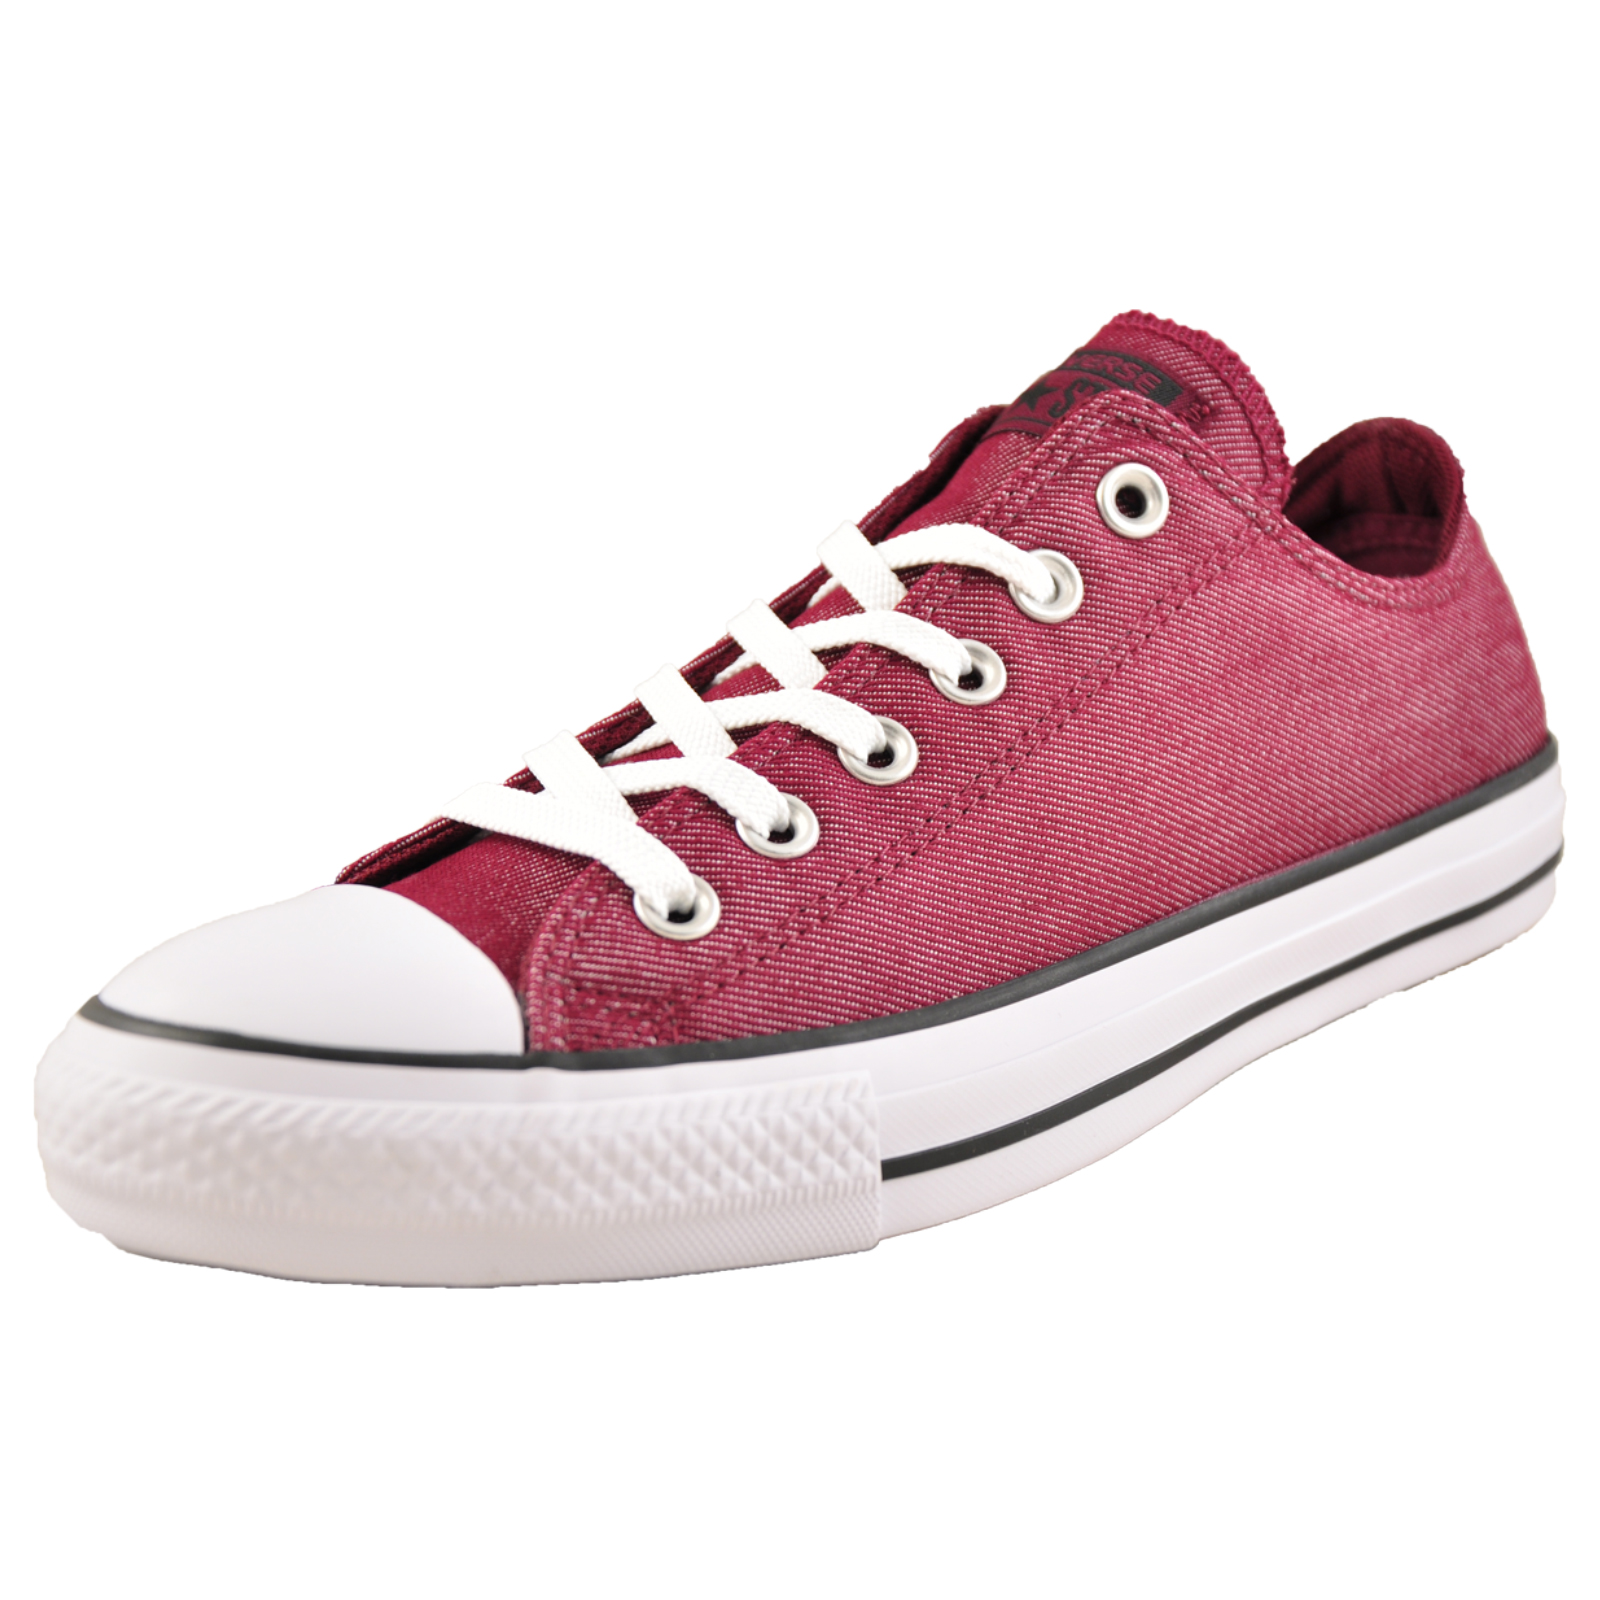 converse pants with shoes attached